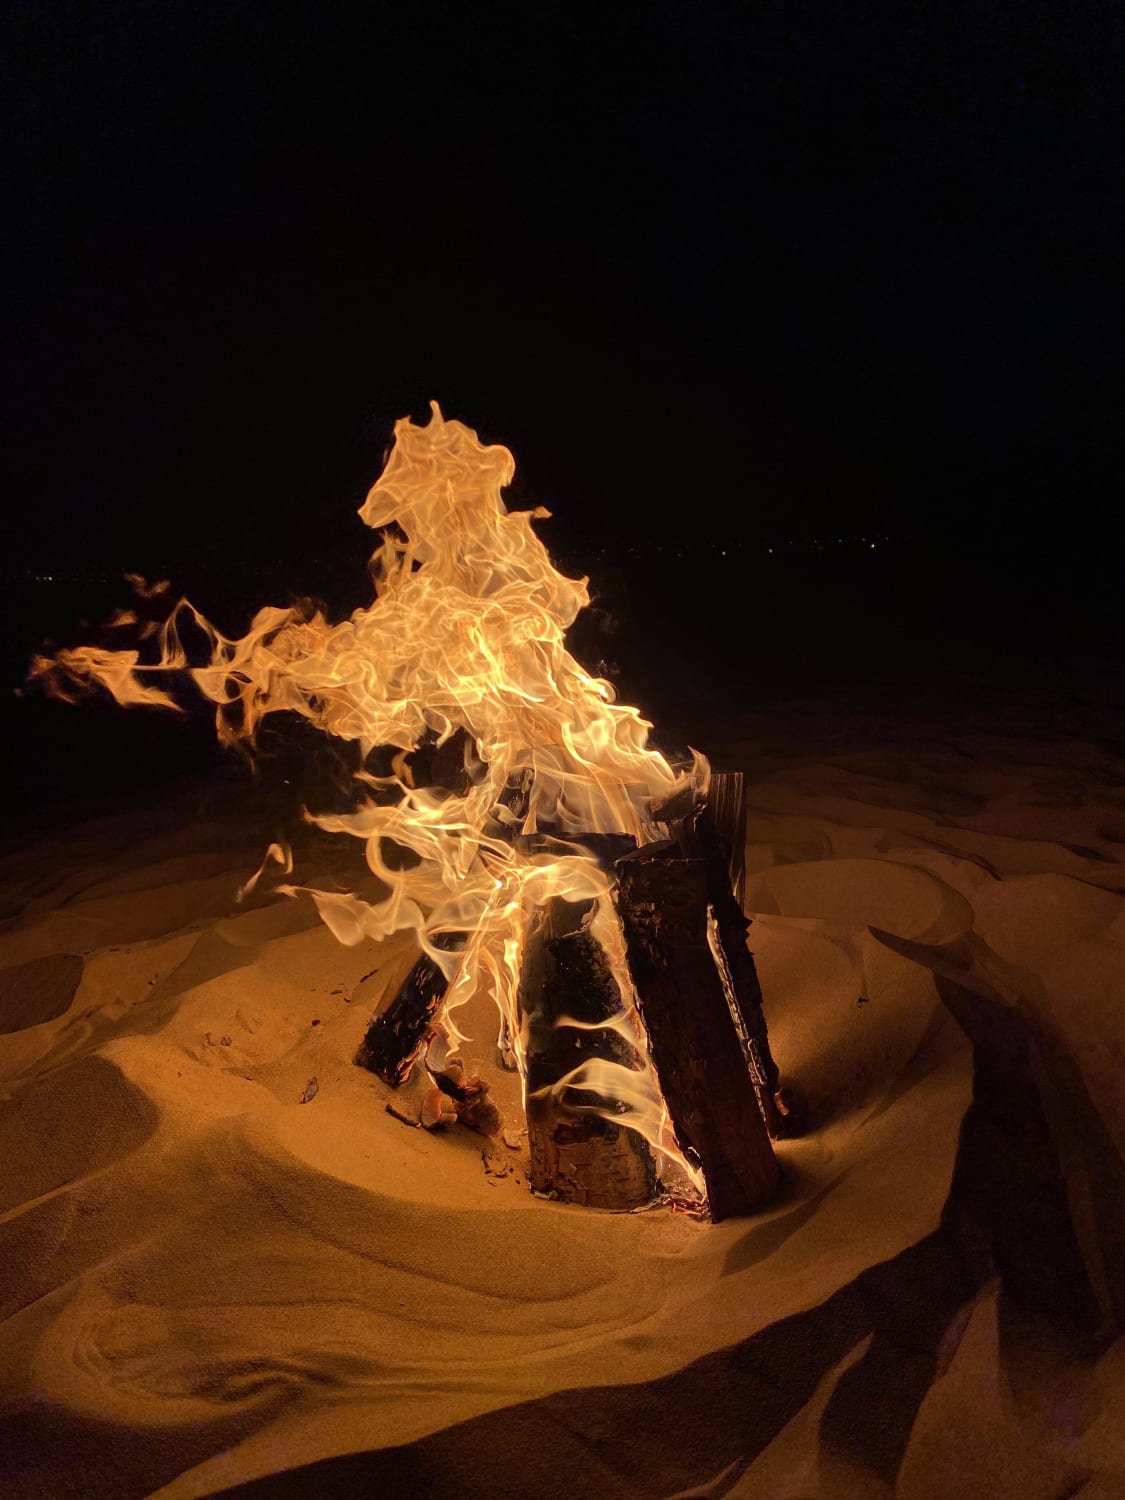 A shot of a campfire in Dubai desert, plus the fire seems to show a horse figure somehow